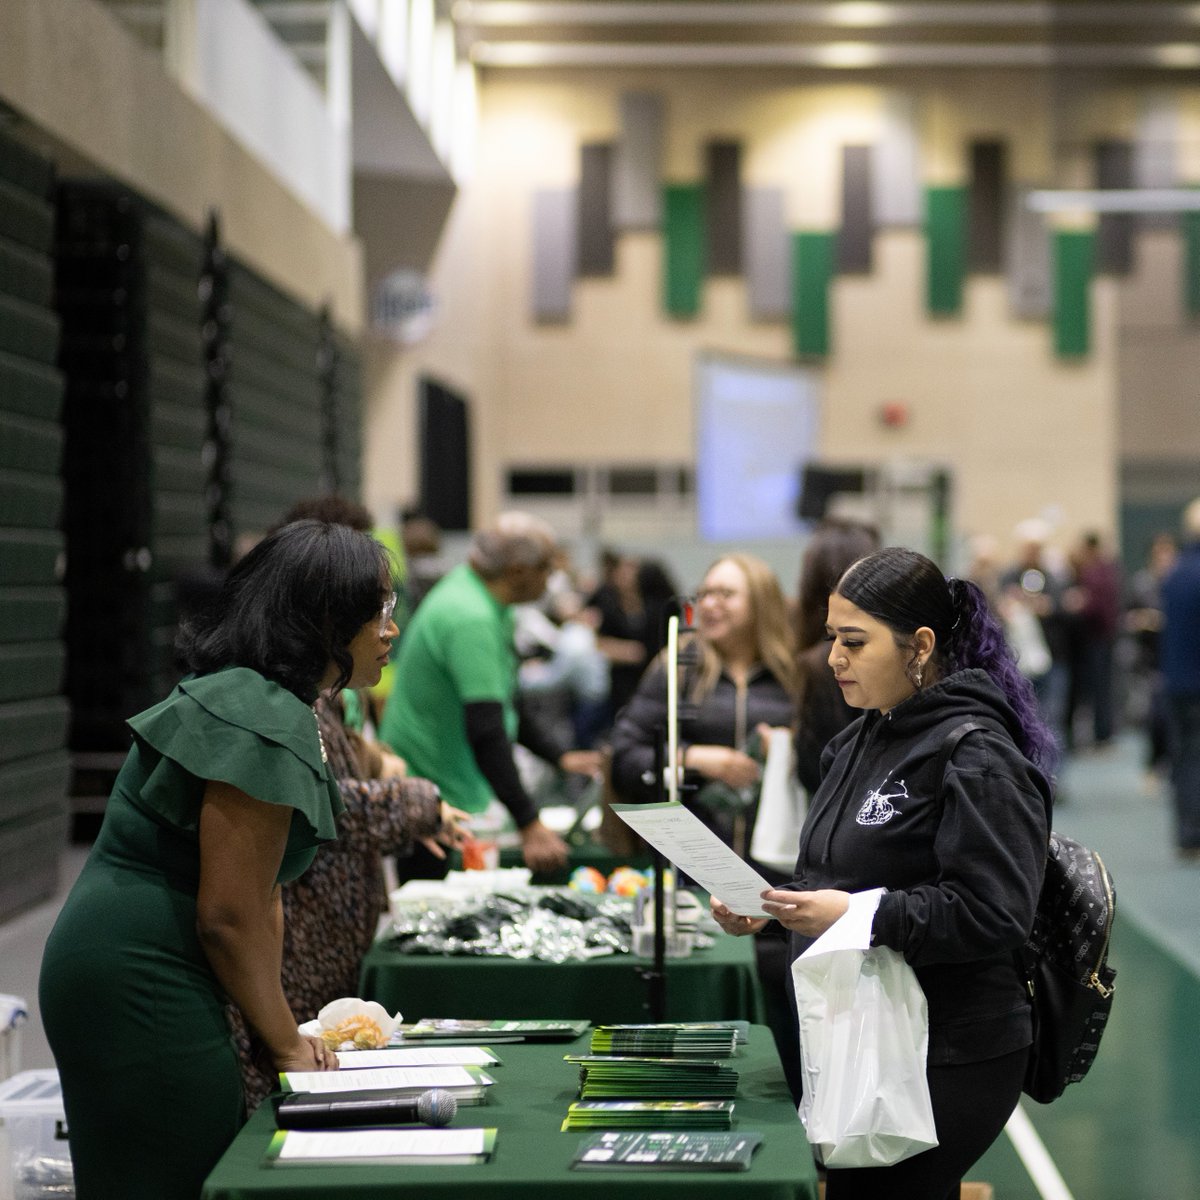 Discover your future at College of DuPage by attending the Preview Tuesday on May 7! Tour our facilities and experience the vibrant campus environment. This evening is designed to answer your questions and get you excited about becoming a Chaparral! bit.ly/3QnjnDi